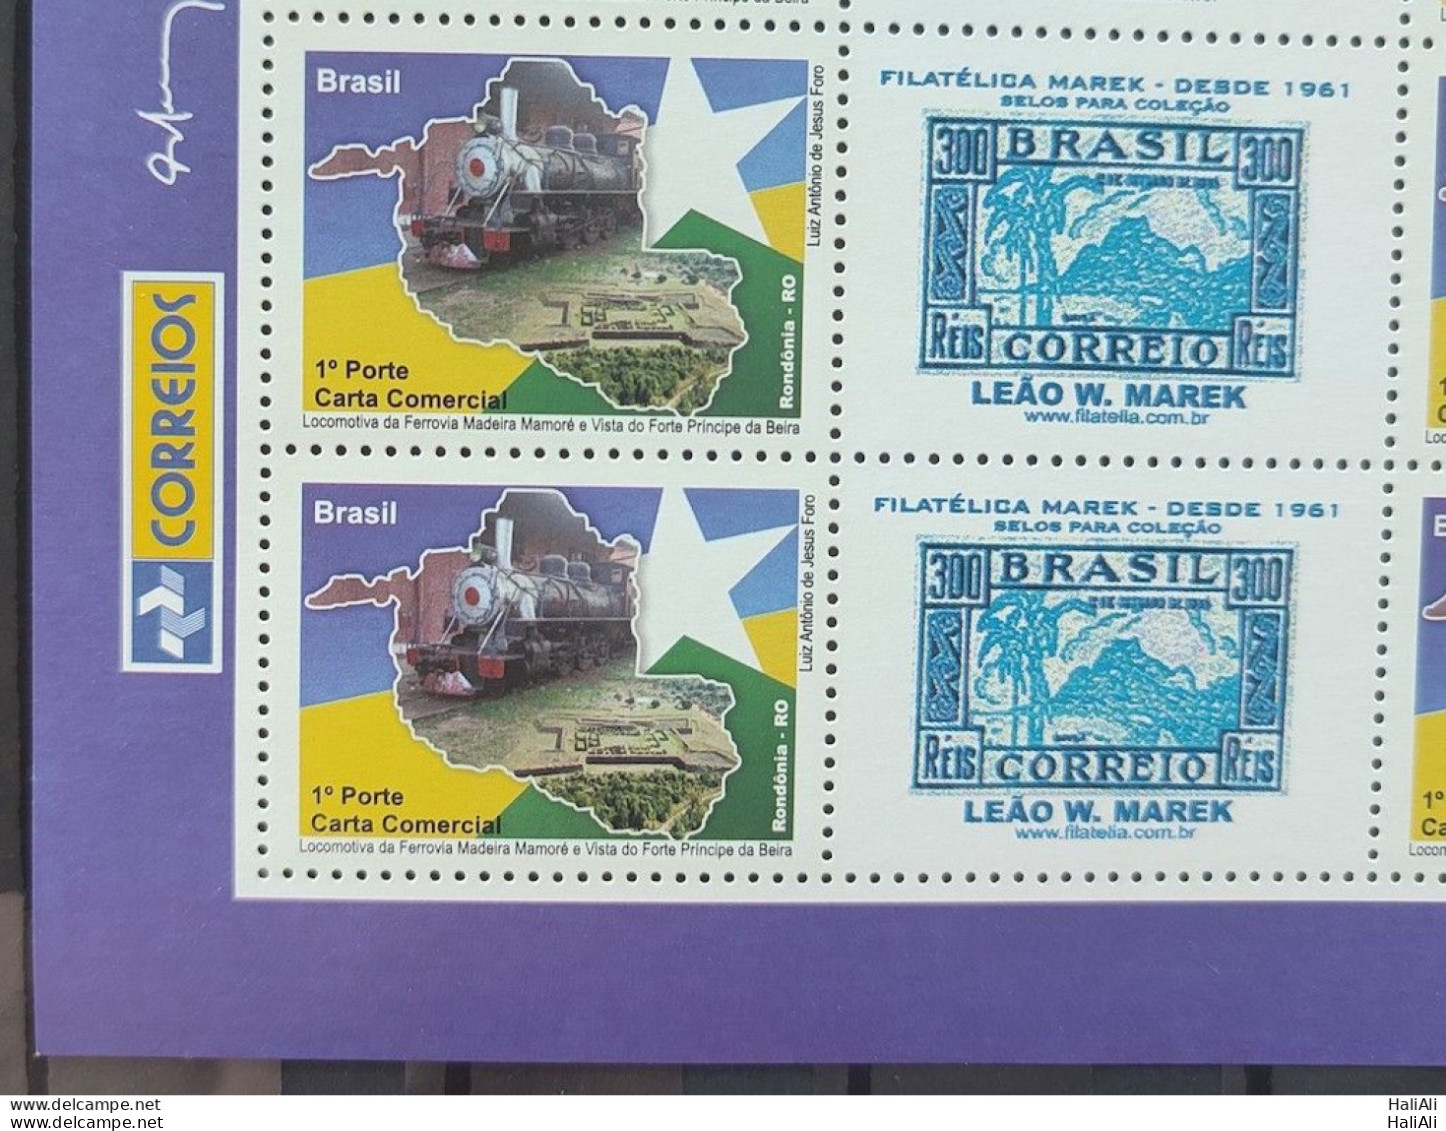 C 2926 Brazil Personalized Stamp Rondonia Train Map Star 2009 Block Of 4 Vignette Post Office - Personalized Stamps